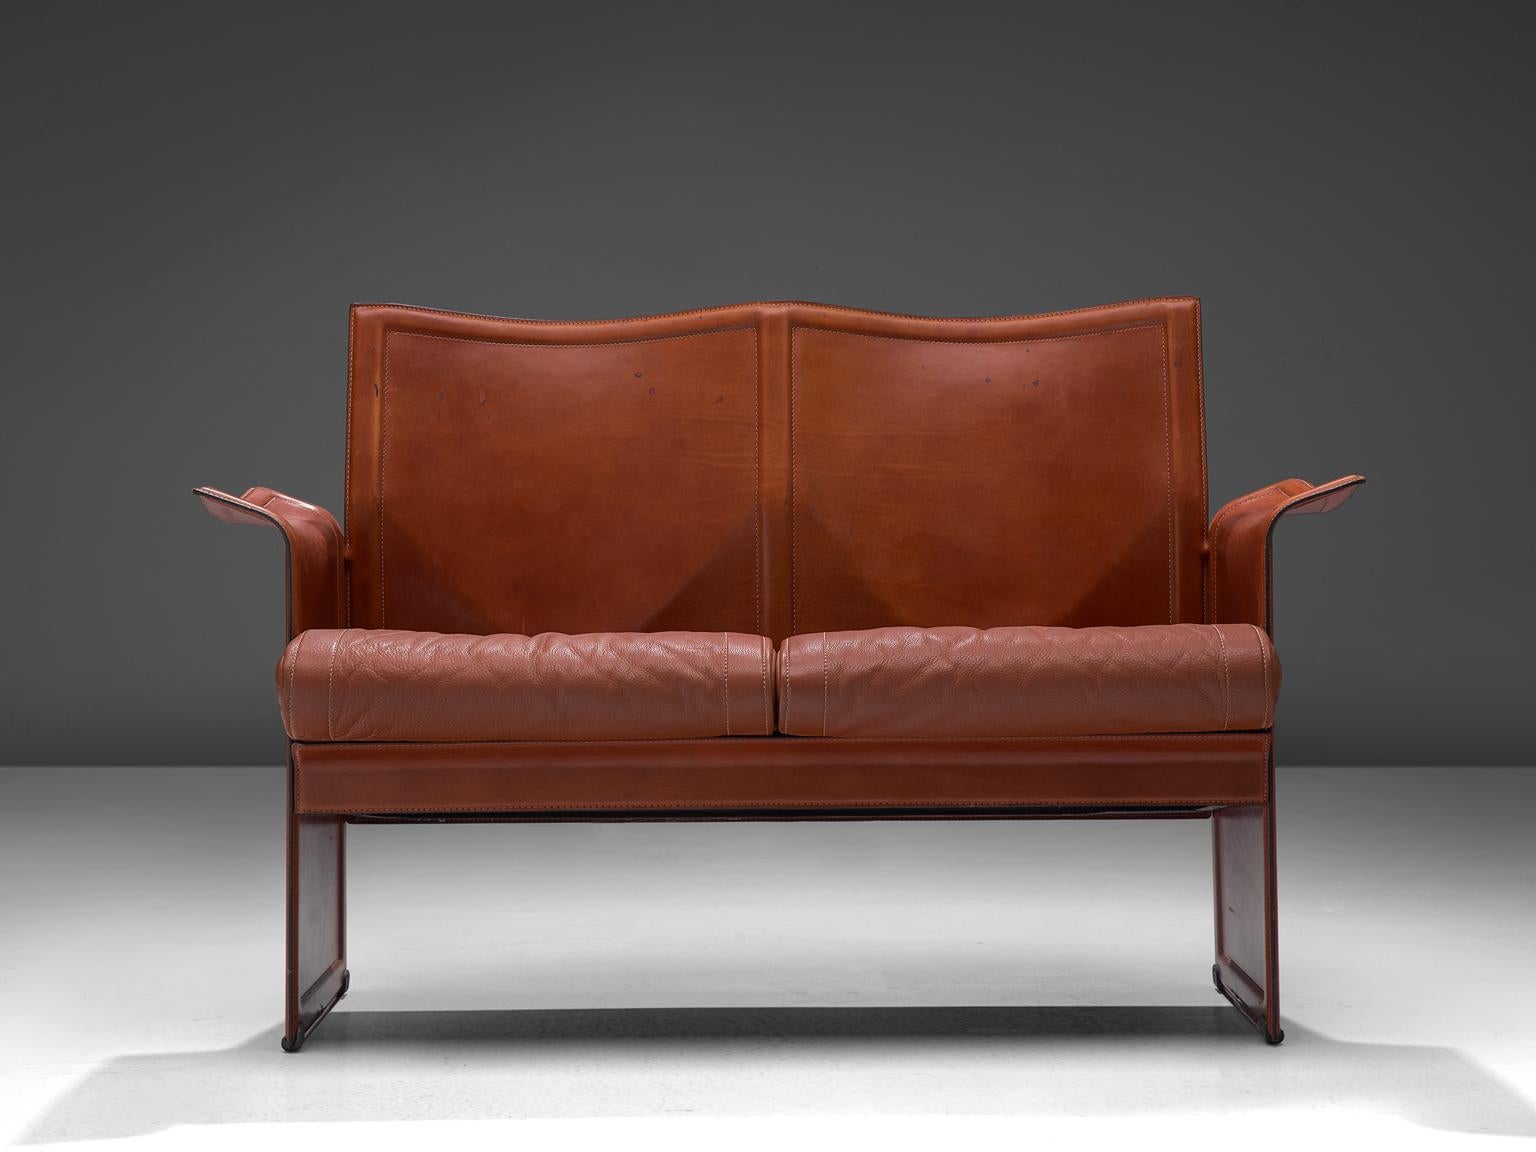 Tito Agnoli for Matteo Grassi, Korium sofa, leather and metal, Italy, 1970s

This sophisticated iconic Korium cognac leather sofa were designed by Tito Agnoli for Matteo Grassi. It features a strong structure, with a wing like appearance and